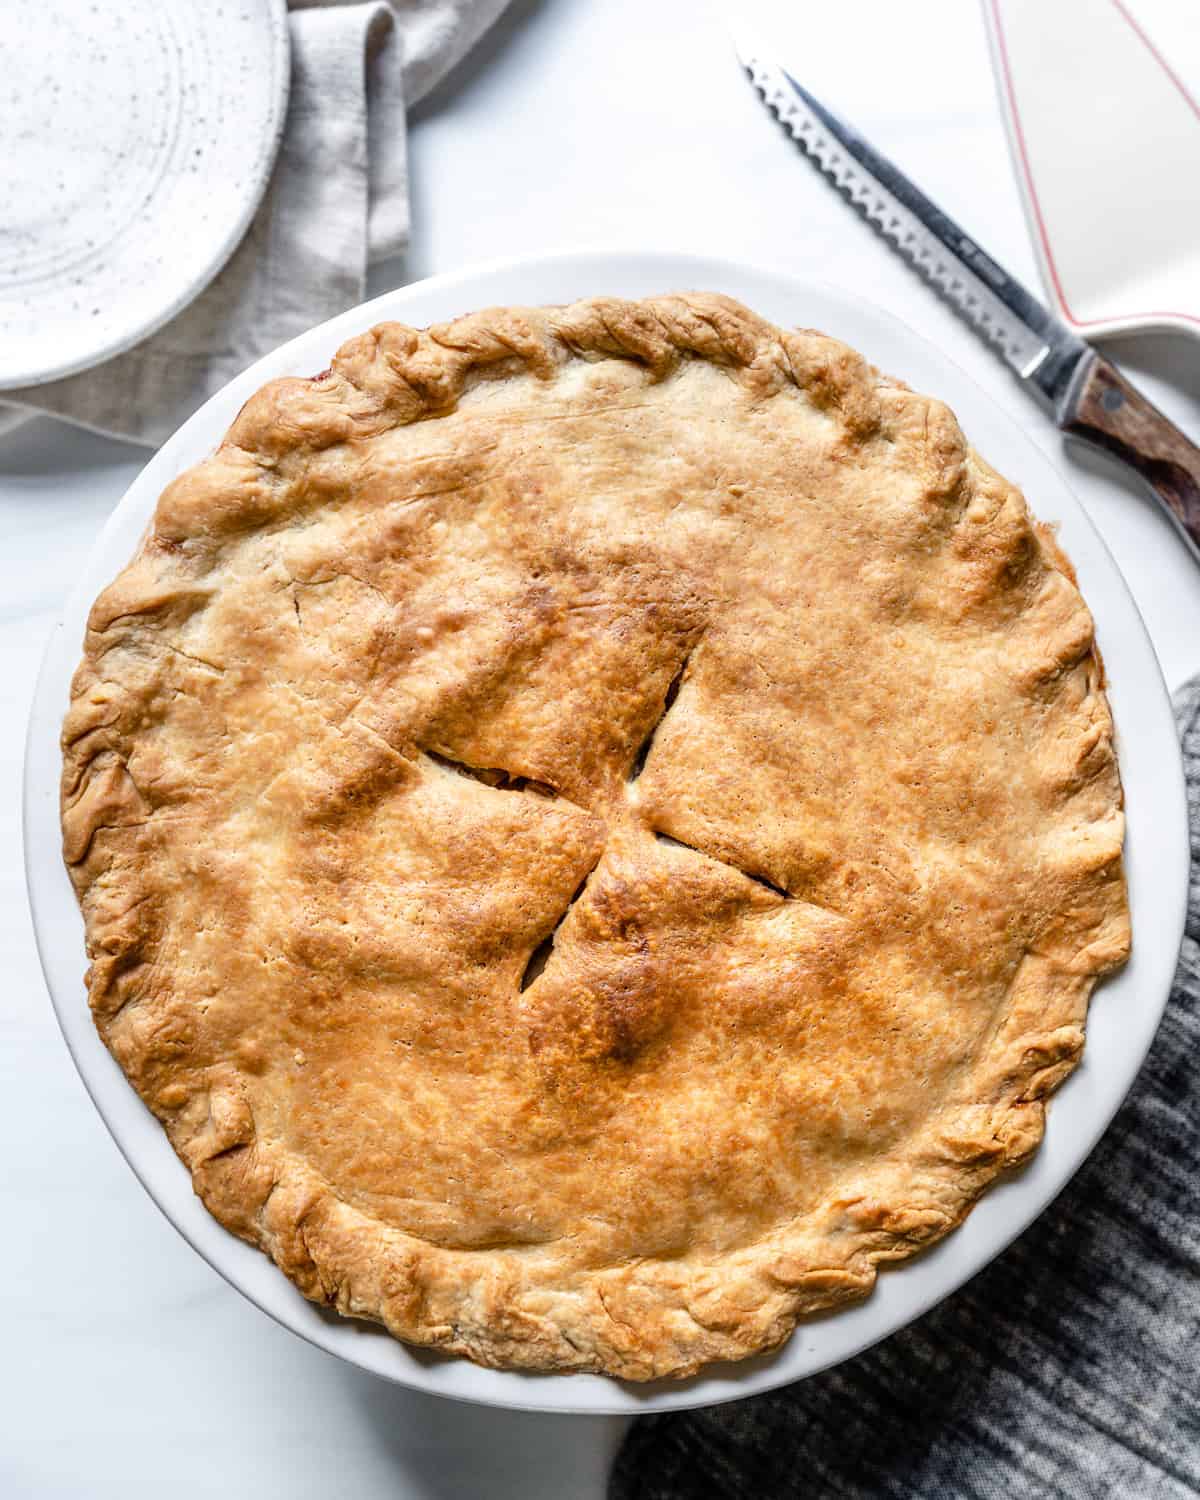 completed Vegan Apple Pie in a pie pan against a white background